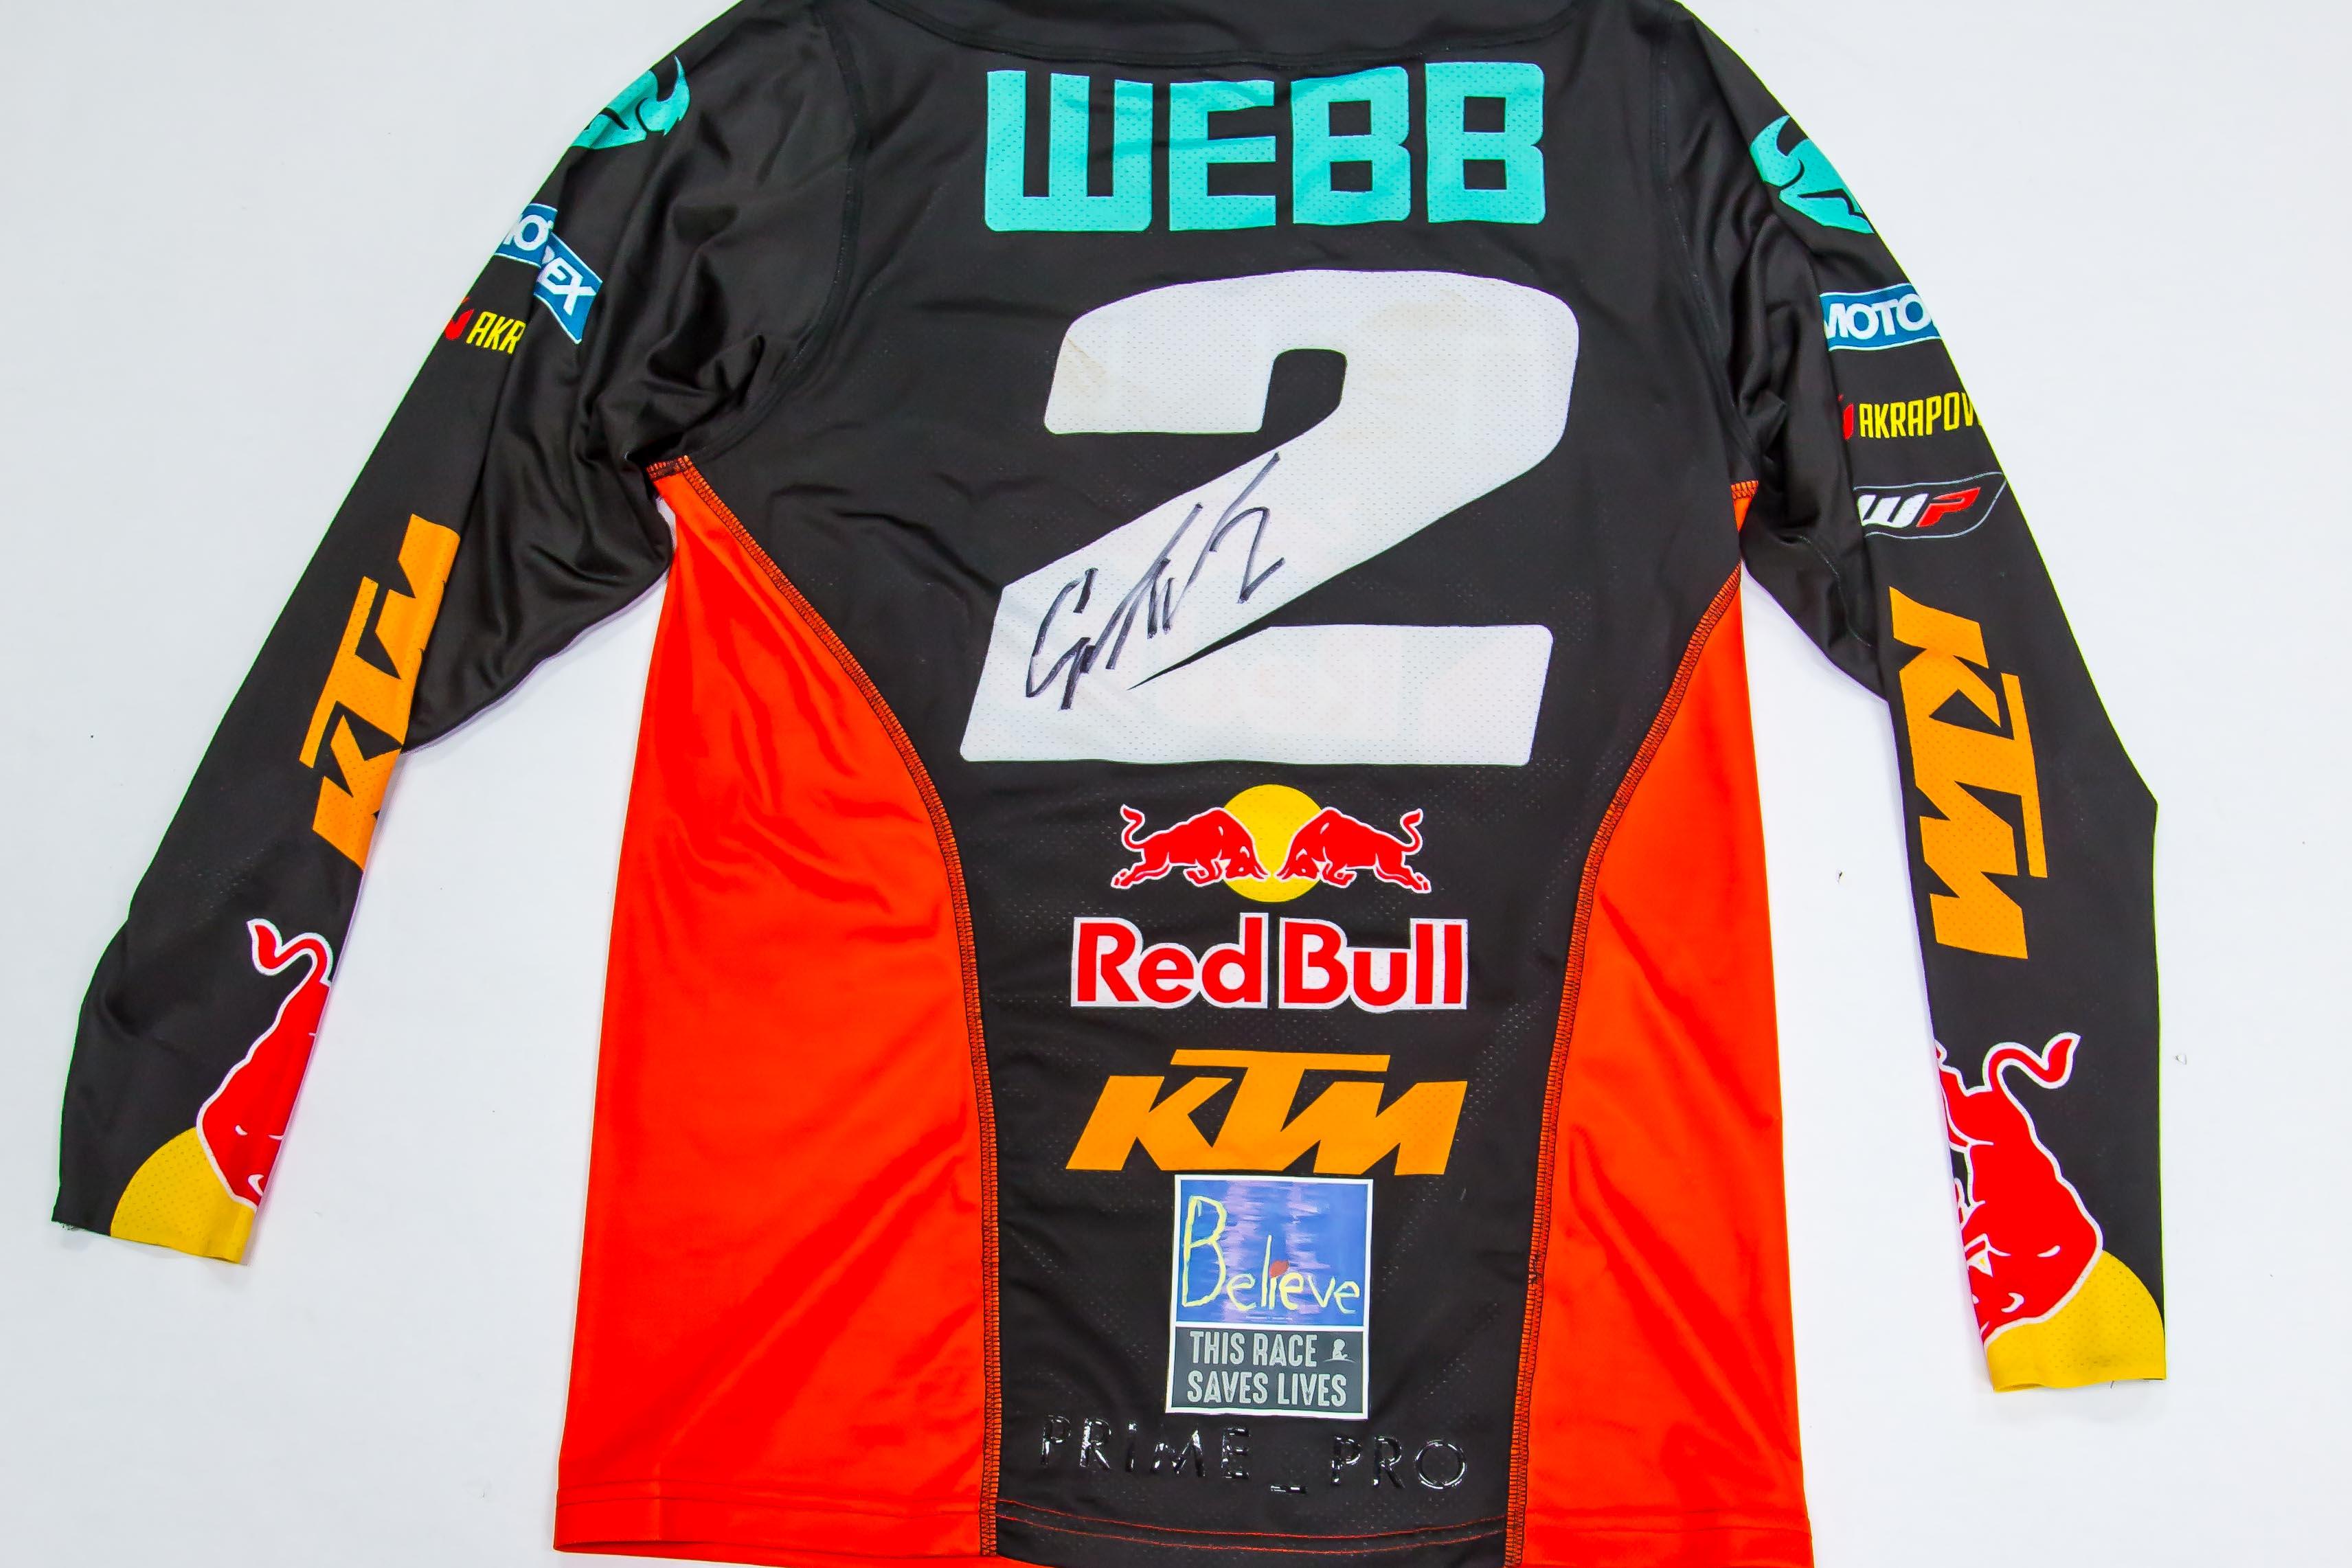 2 Cooper Webb - Signed Race Jersey 2of3